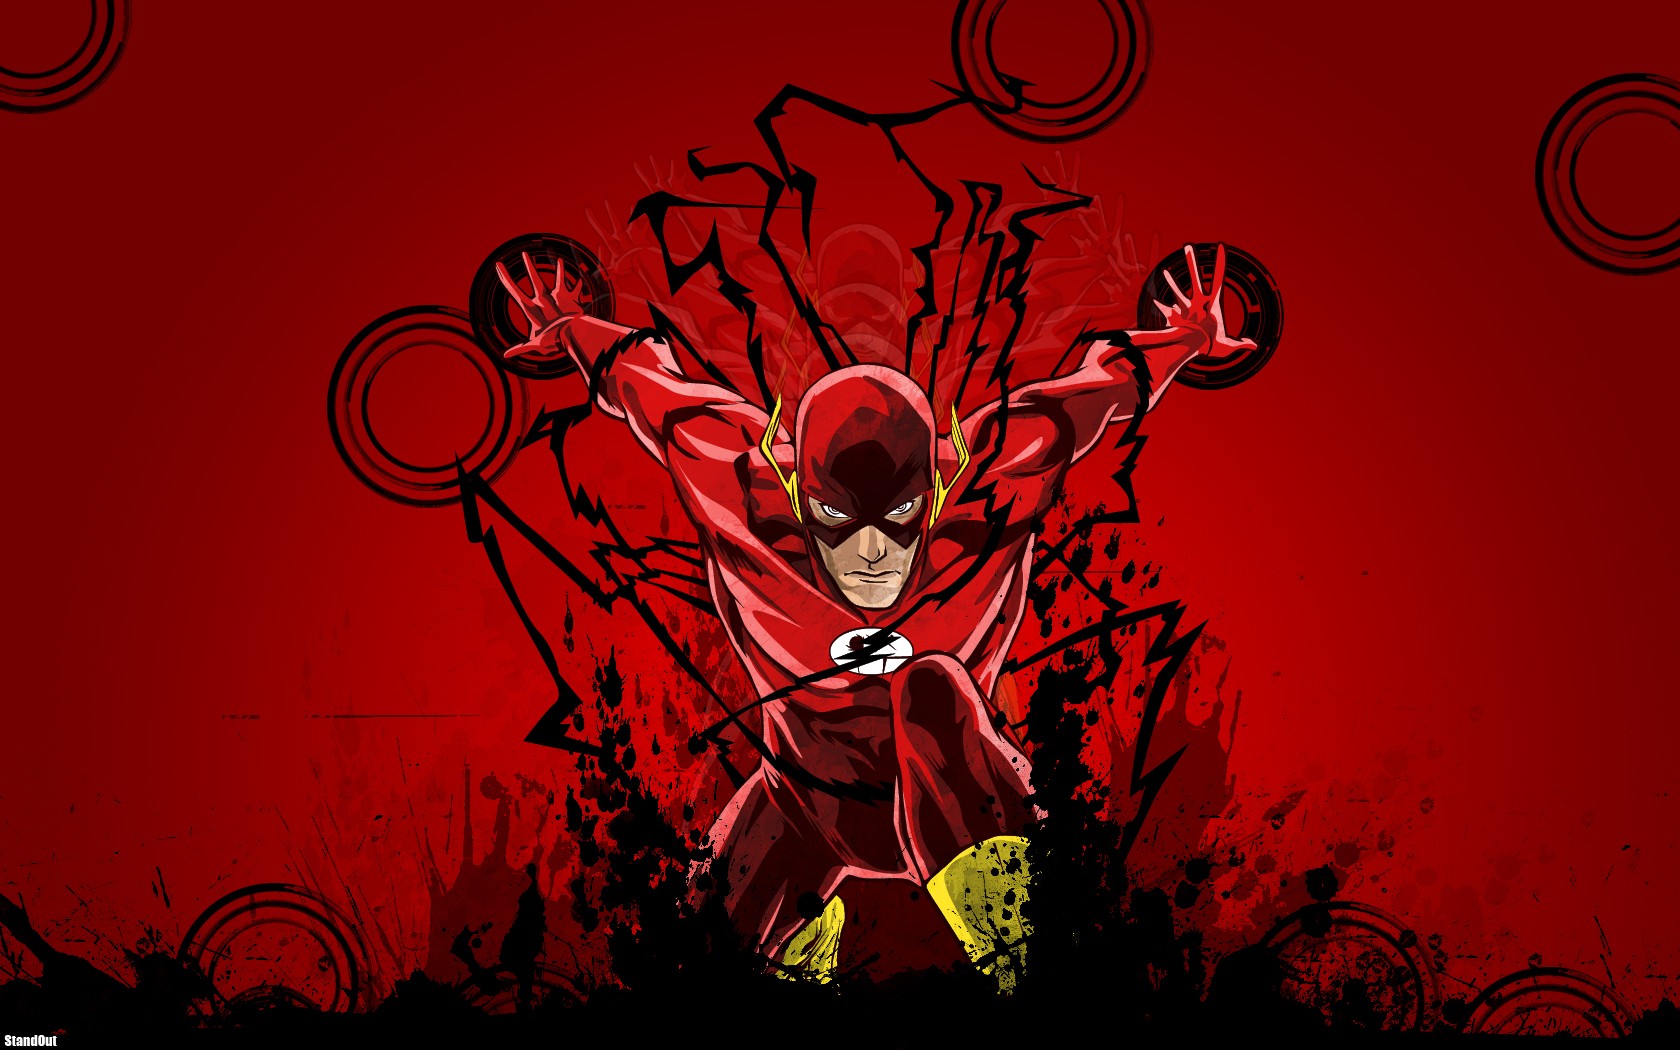 General 1680x1050 The Flash DC Comics Justice League red red background simple background superhero